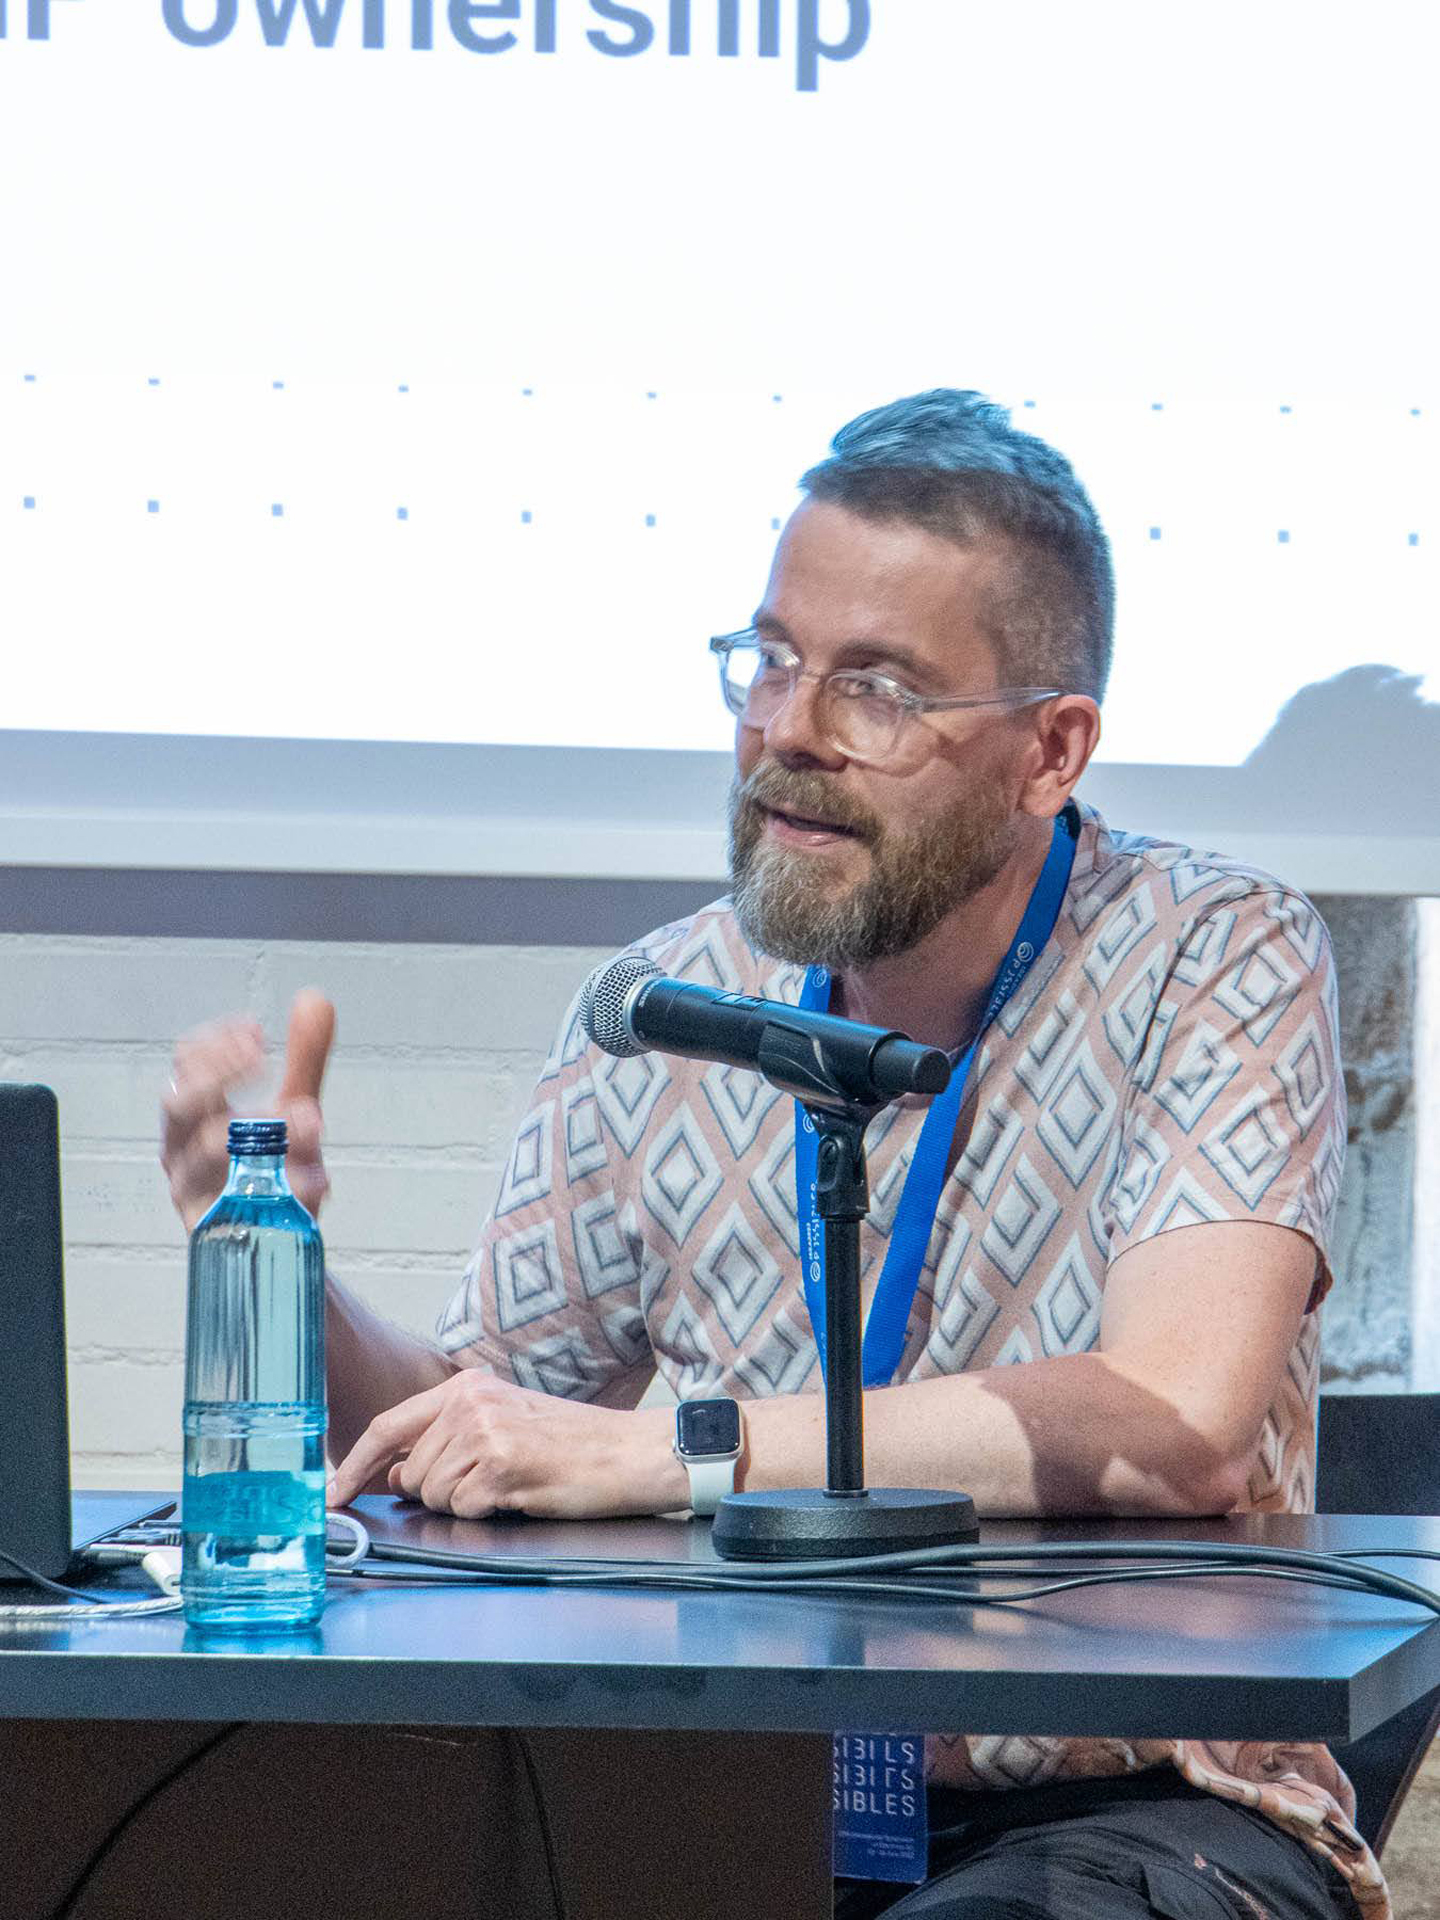 ©ISEA2022: 27th International Symposium on Electronic Art, Aki Järvinen, Restoring the Recent Past: Learnings from producing a retrospective of VR content from the UK